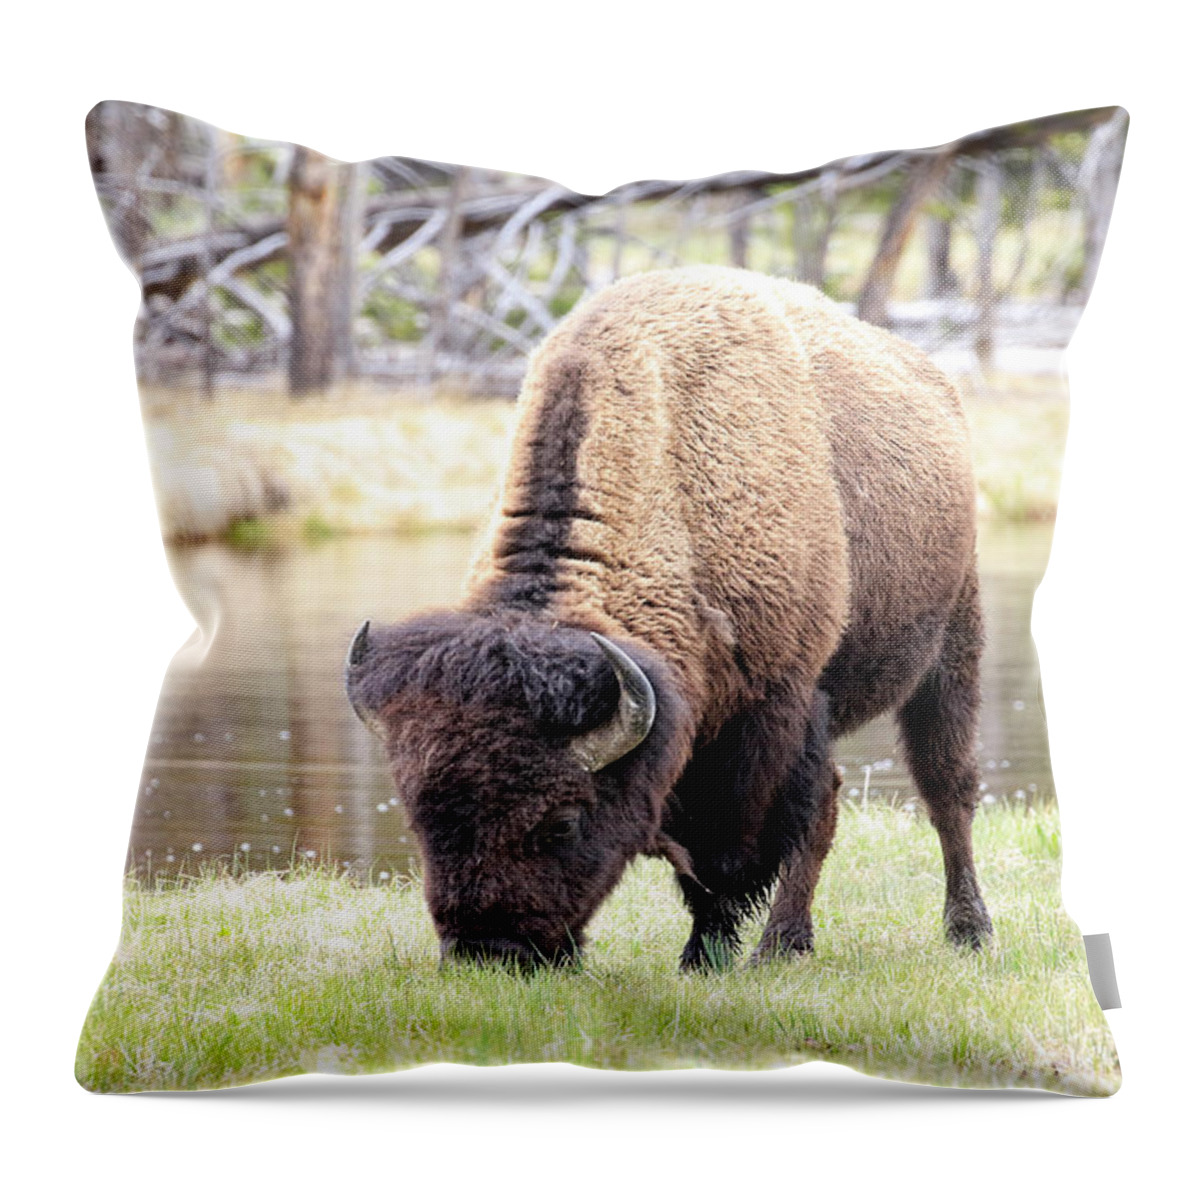 Bison Throw Pillow featuring the photograph Bison By Water by Steve McKinzie